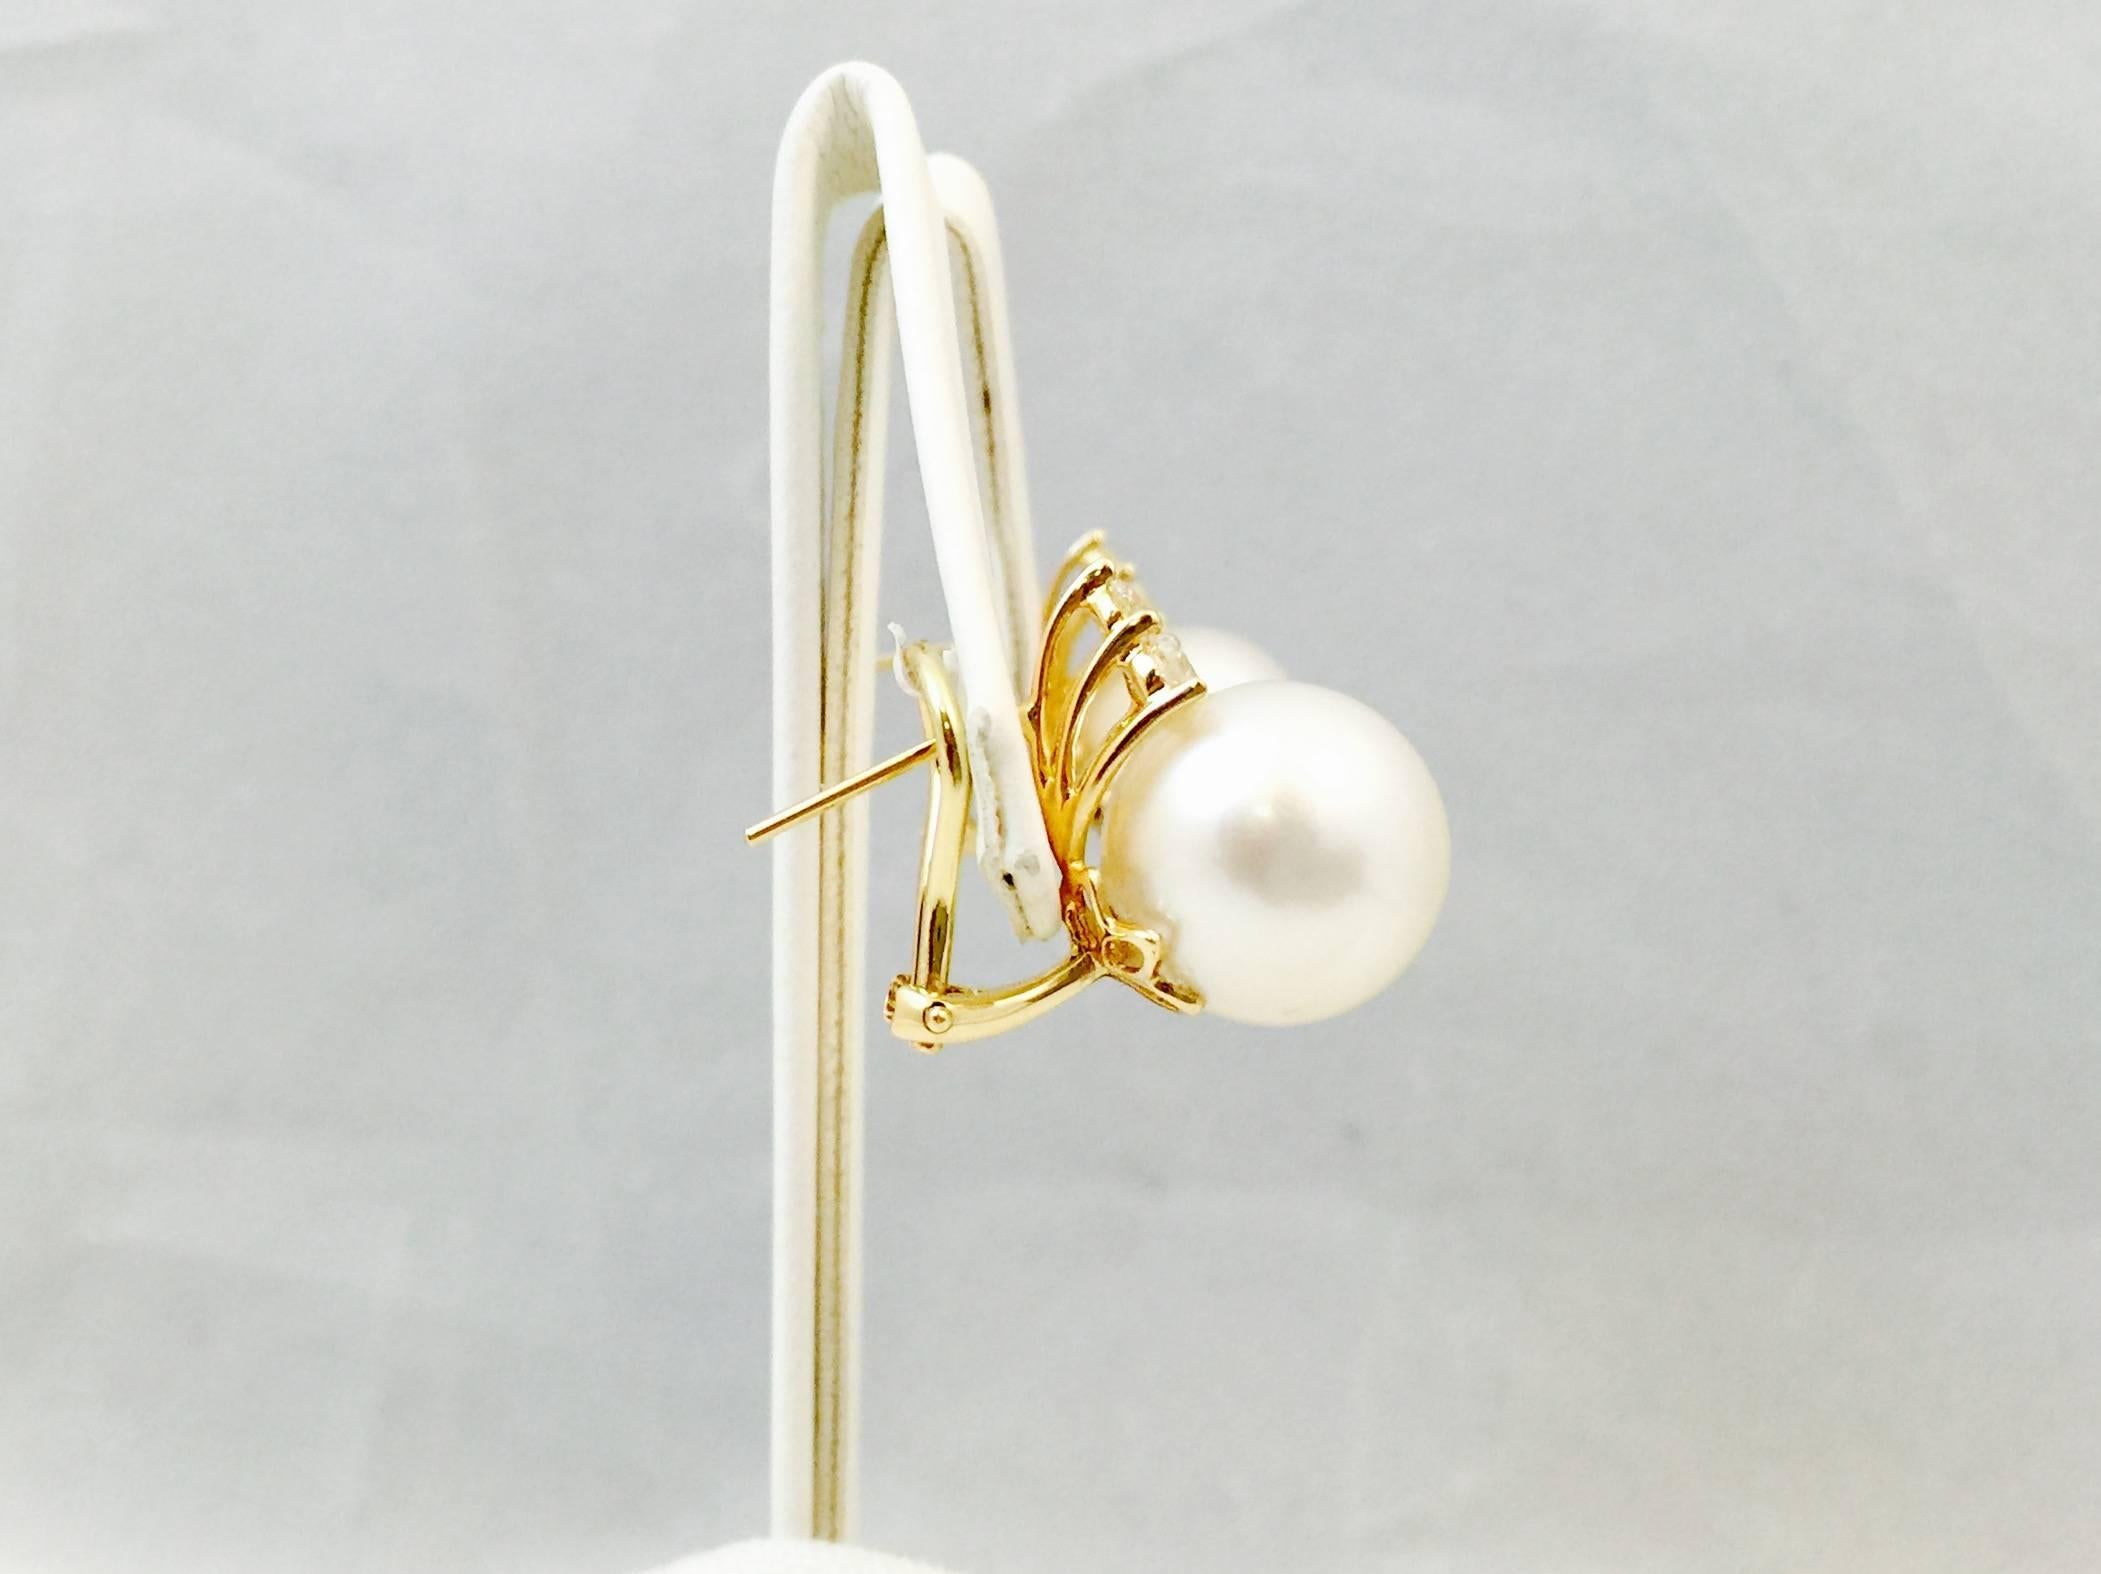 What could be more classic than a pair of pearl and diamond earrings?  These beauties, however, go to loftier heights!  18 karat yellow gold the base for perfectly matched 12MM white cultured South Sea Pearls with high lustre, topped by three